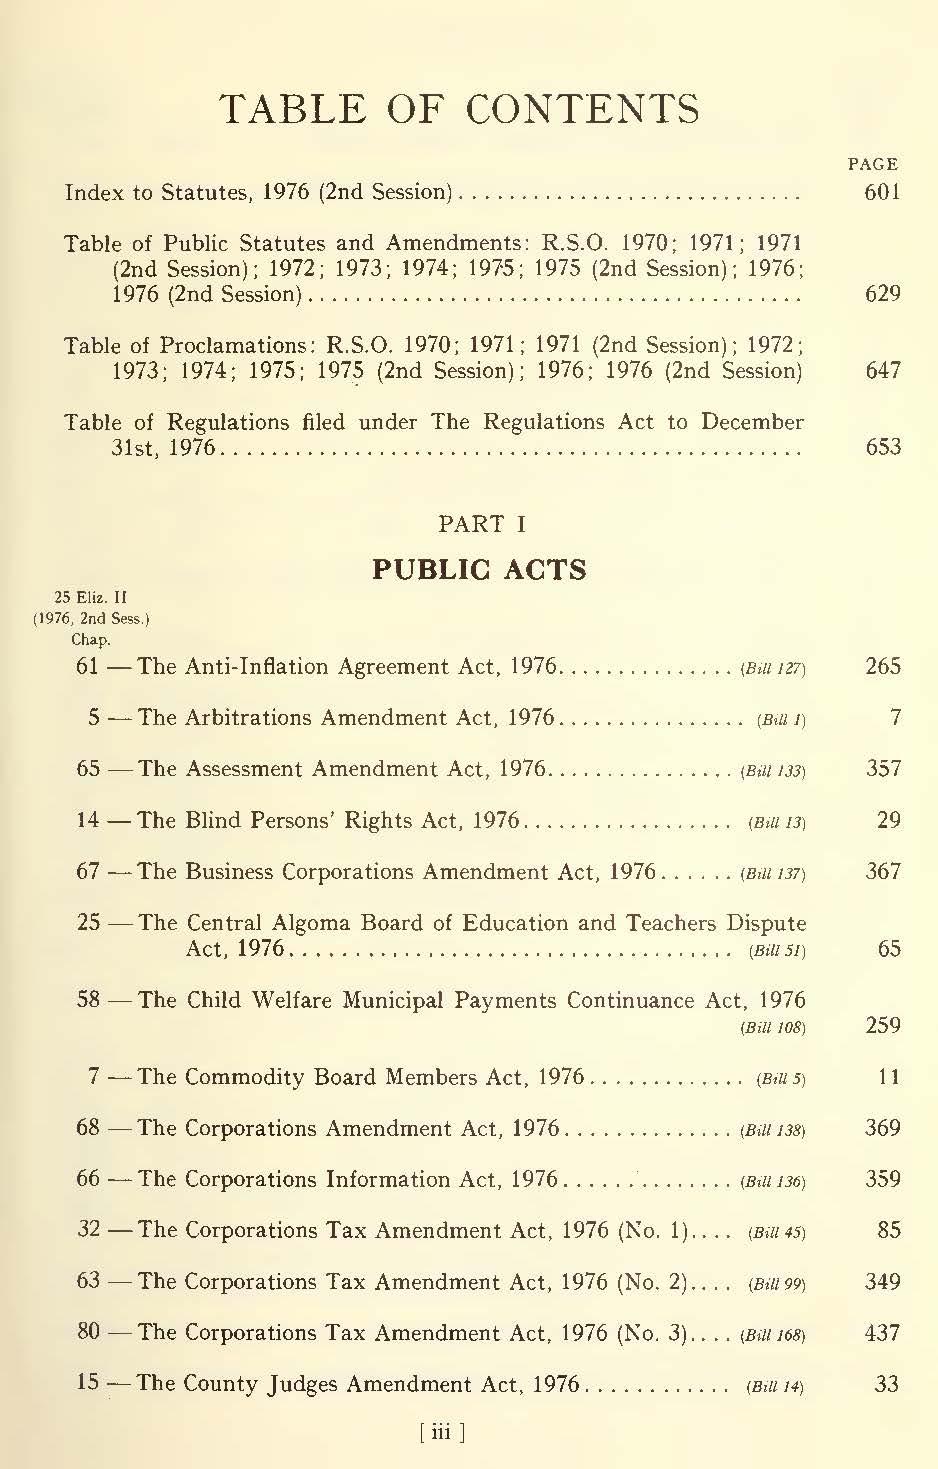 Index to Statutes, 1976 (2nd Session)............................. 601 Table of Public Statutes and Amendments: R.S.0. 1970; 1971; 1971 (2nd Session); 1972; 1973; 1974; 1975; 1975 (2nd Session); 1976; 1976 (2nd Session).